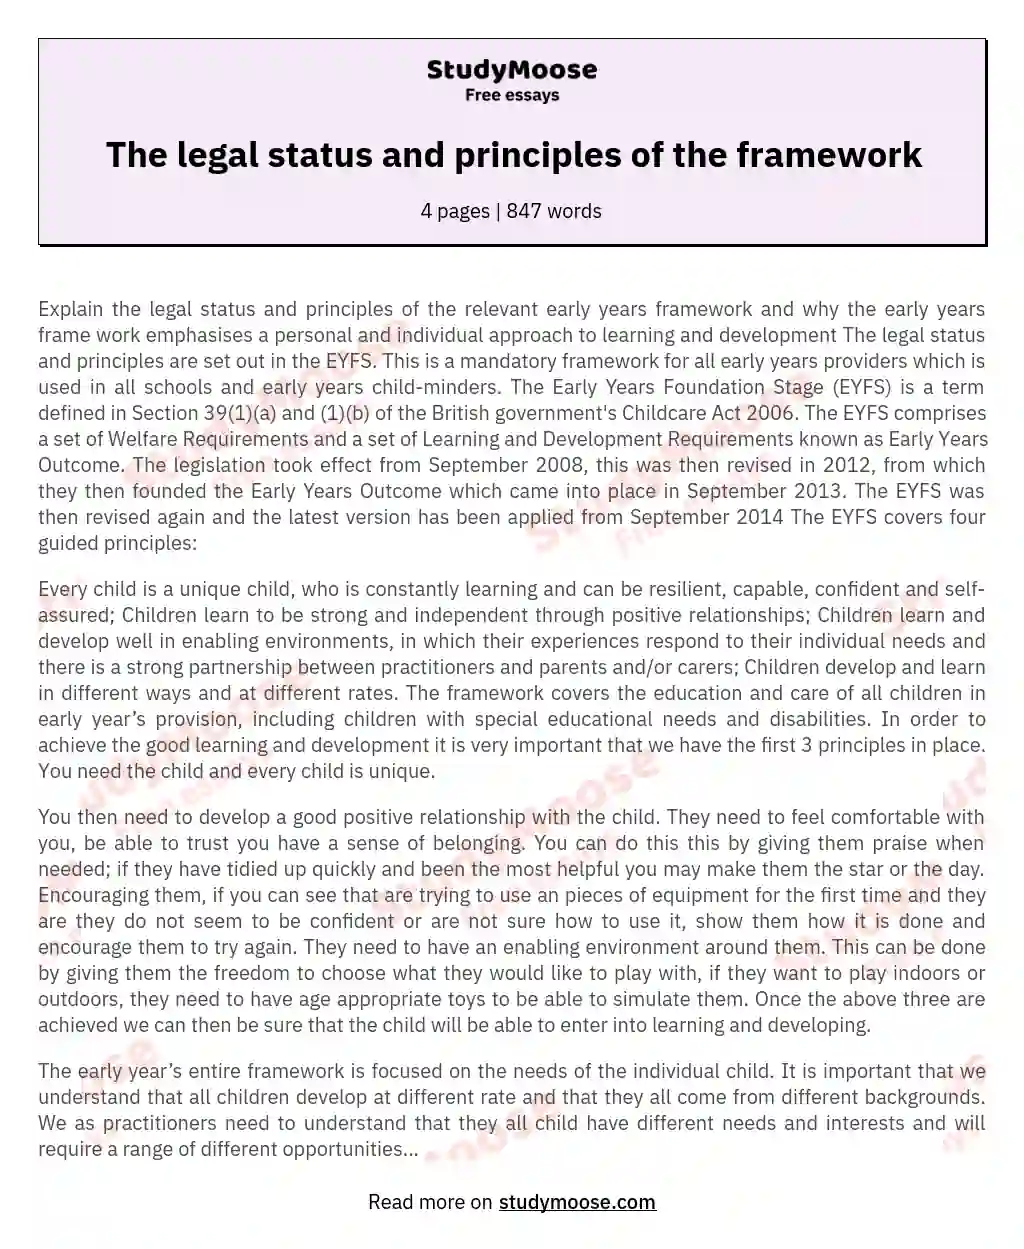 The legal status and principles of the framework essay